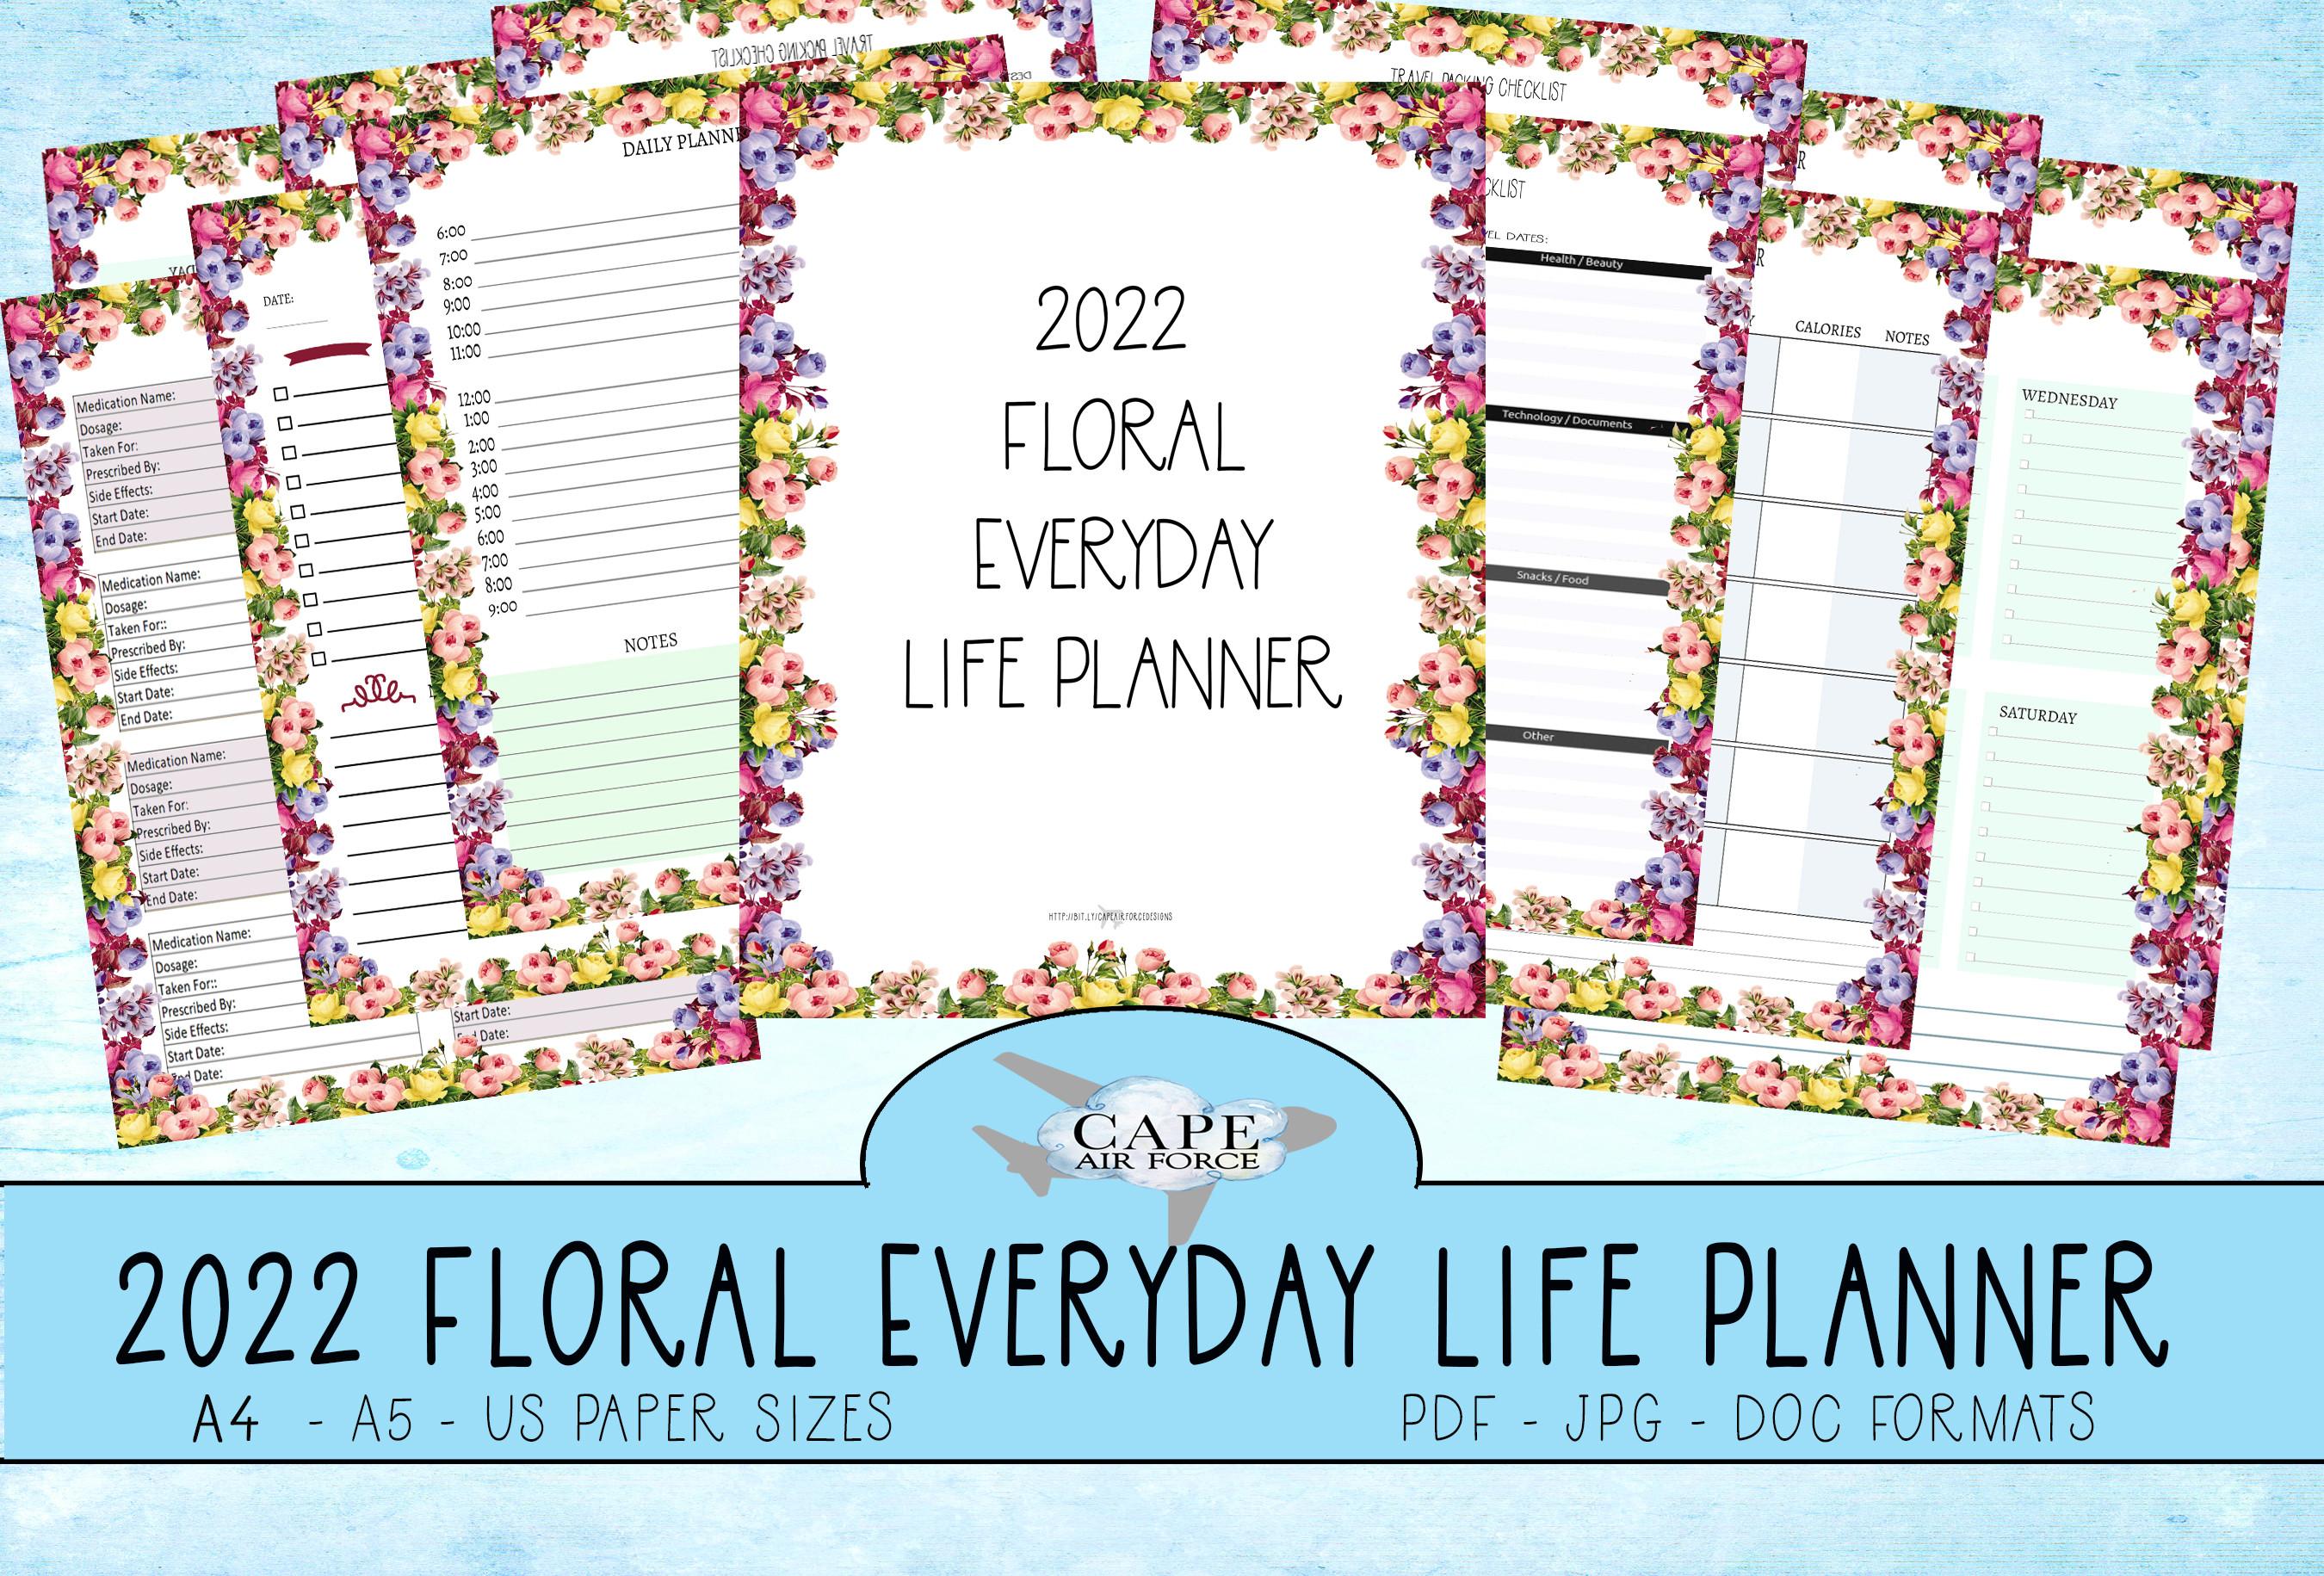 2022 Floral Everyday Life Planner